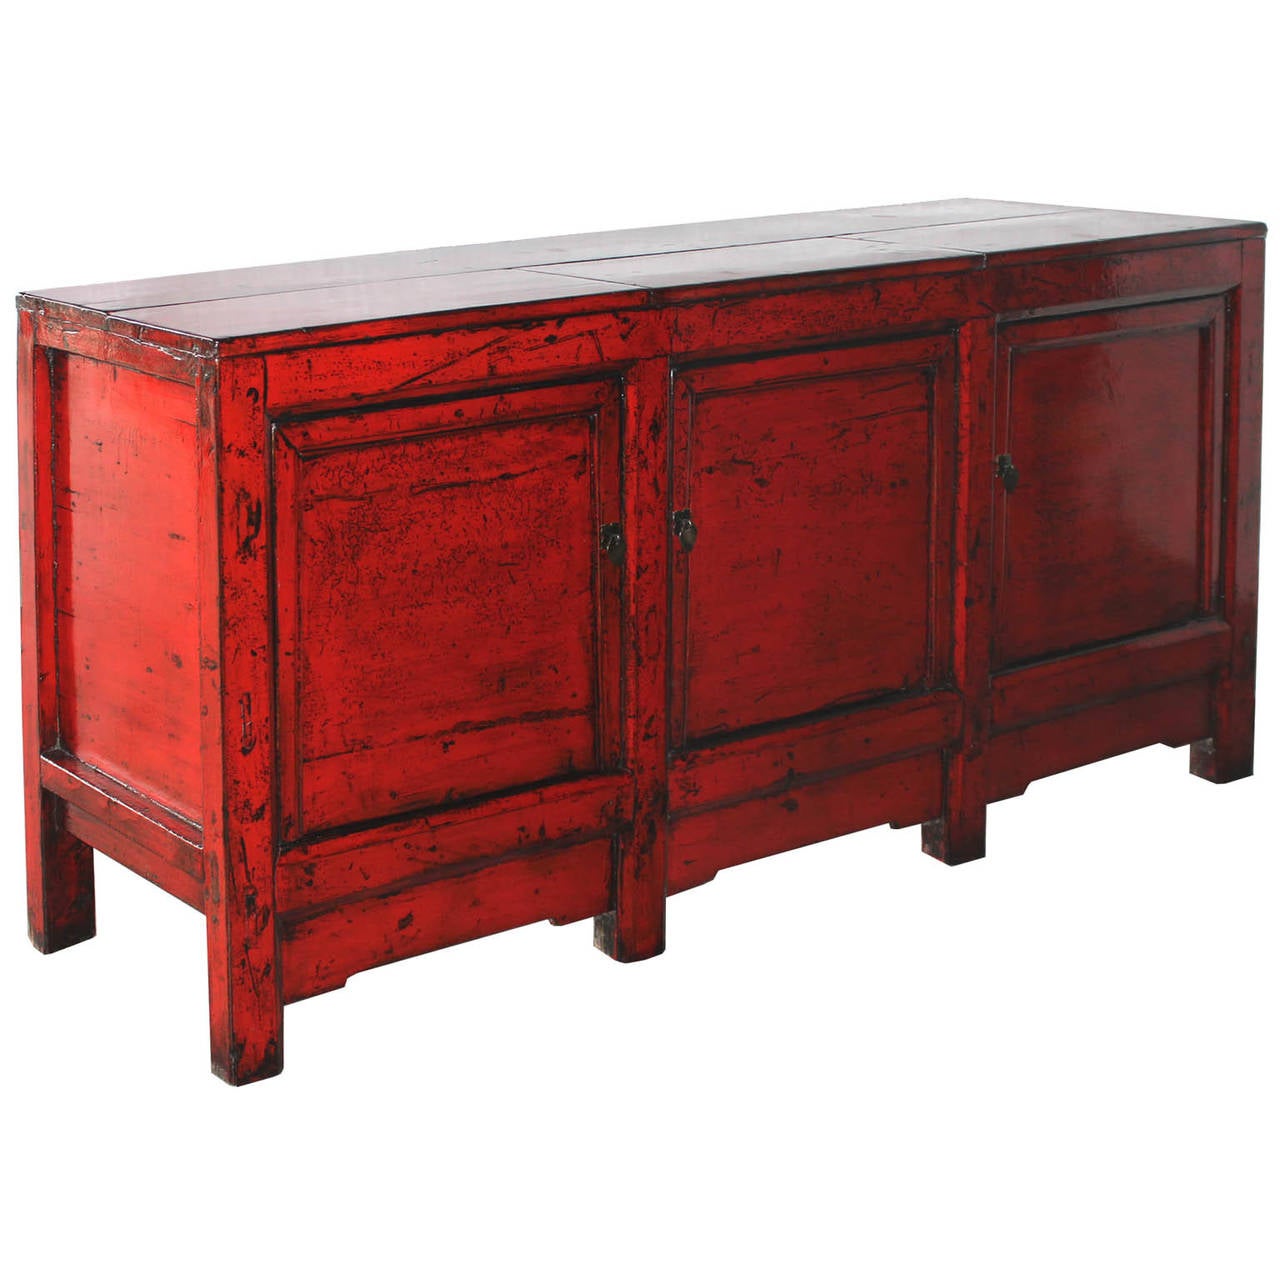 Red lacquer sideboard with paneled doors, straight bottom skirts, and exposed wood edges New interior shelves and hardware. Use in the living room, entry way, or dining room for a focal point in a modern interior.